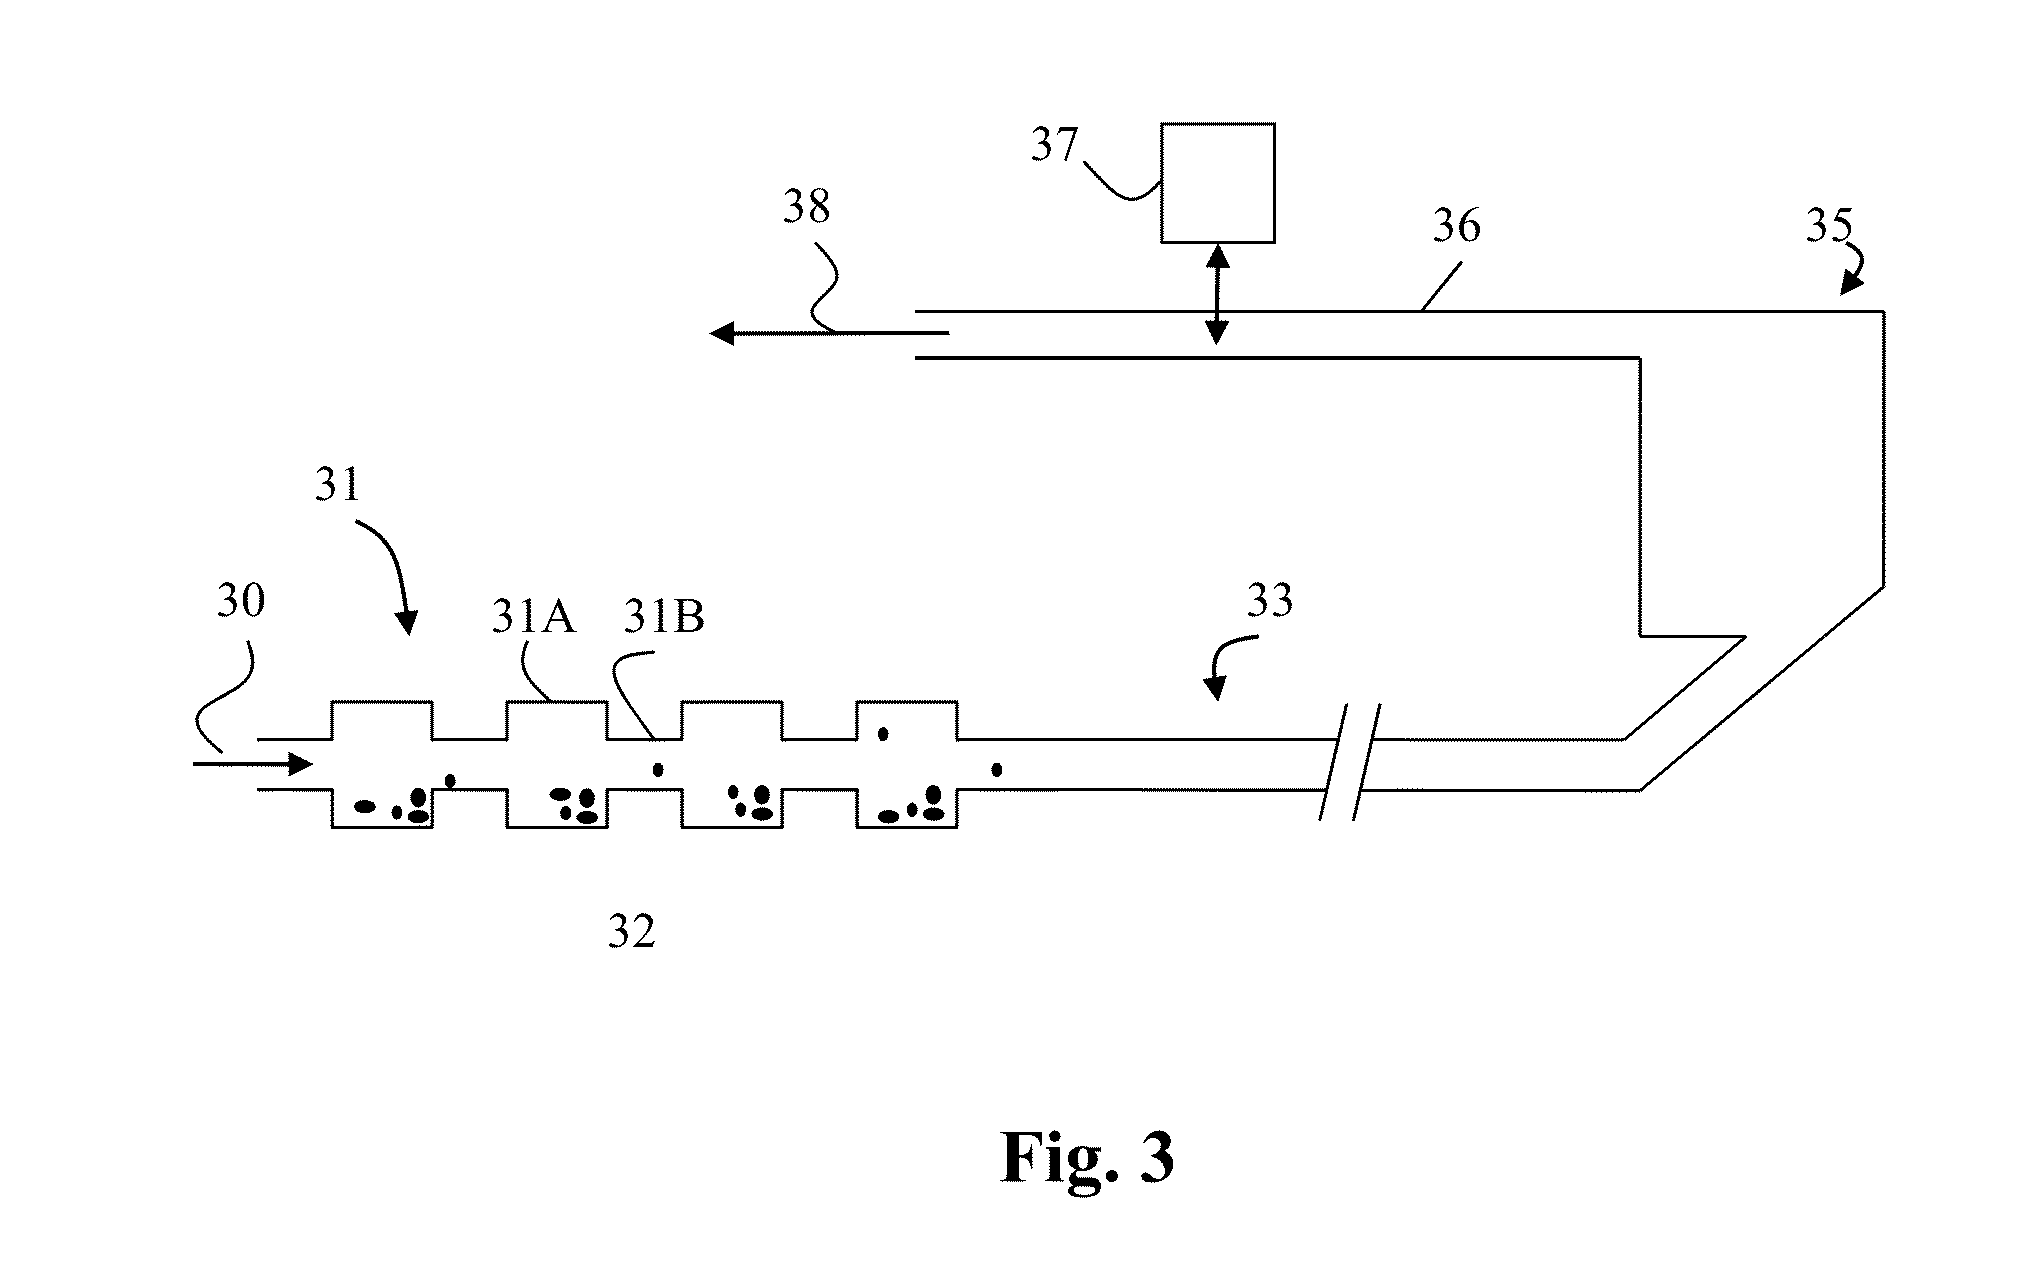 Method and system for analyzing solid matter containing liquids and monitoring or controlling processes containing such liquids